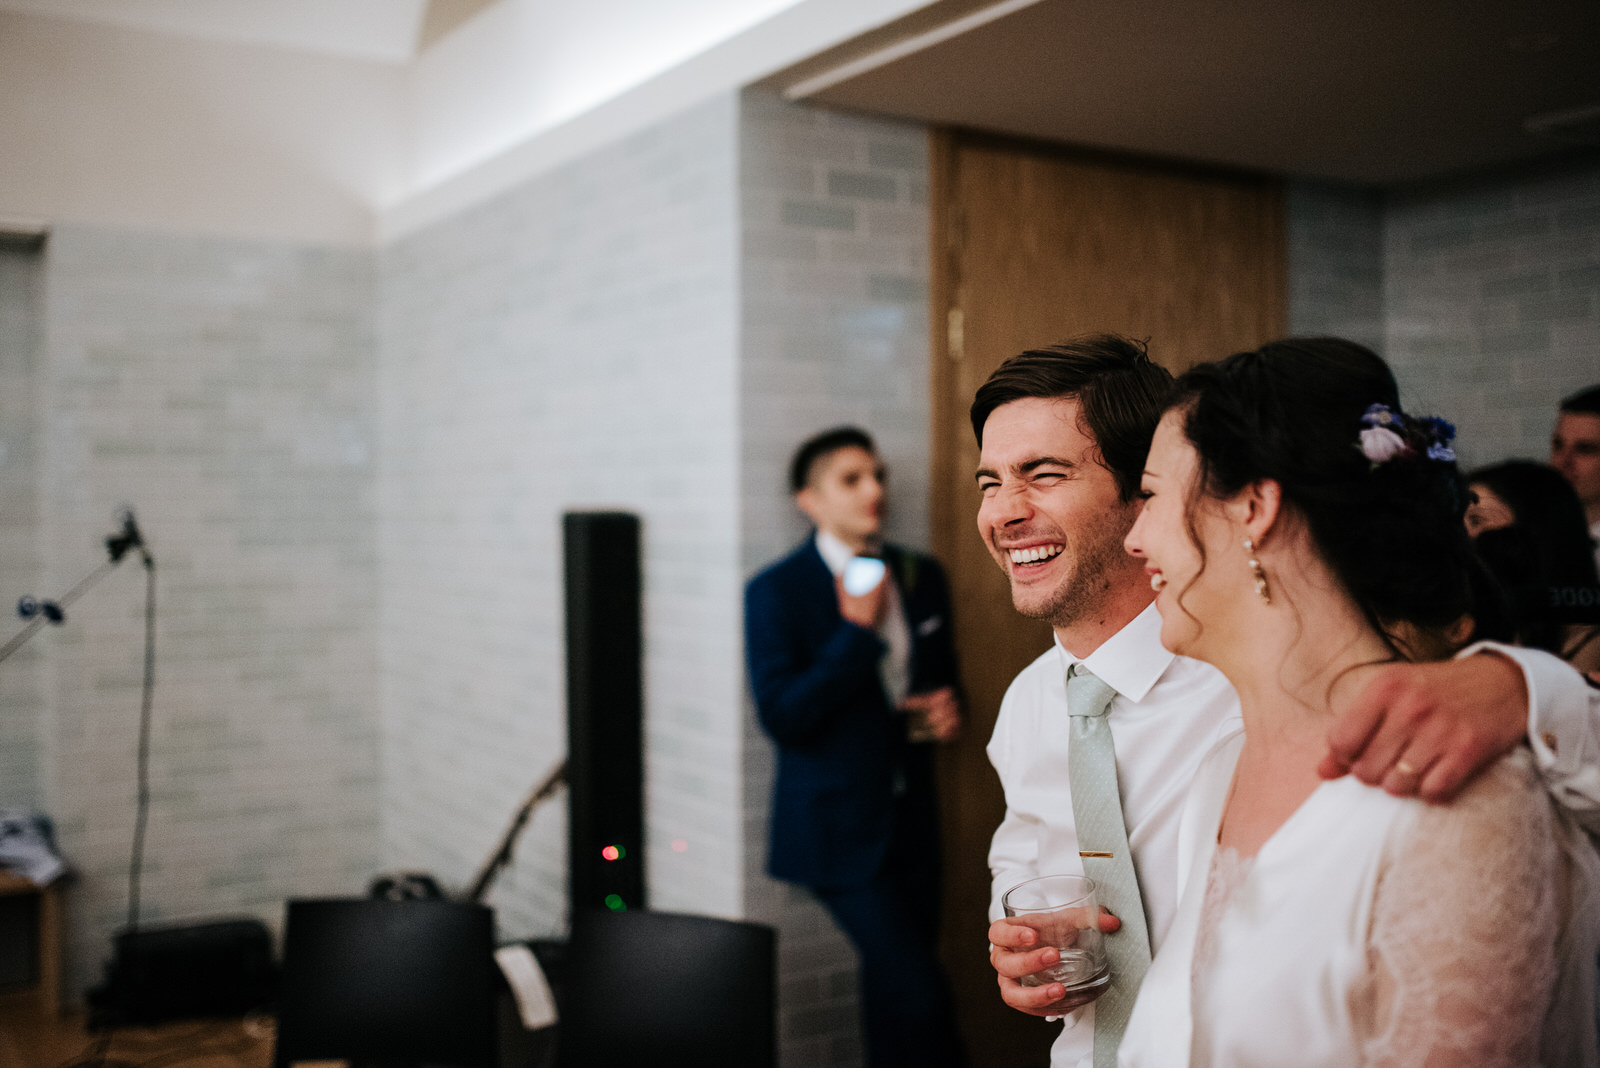 Groom reacts to speeches by squeezing bride and smiling 